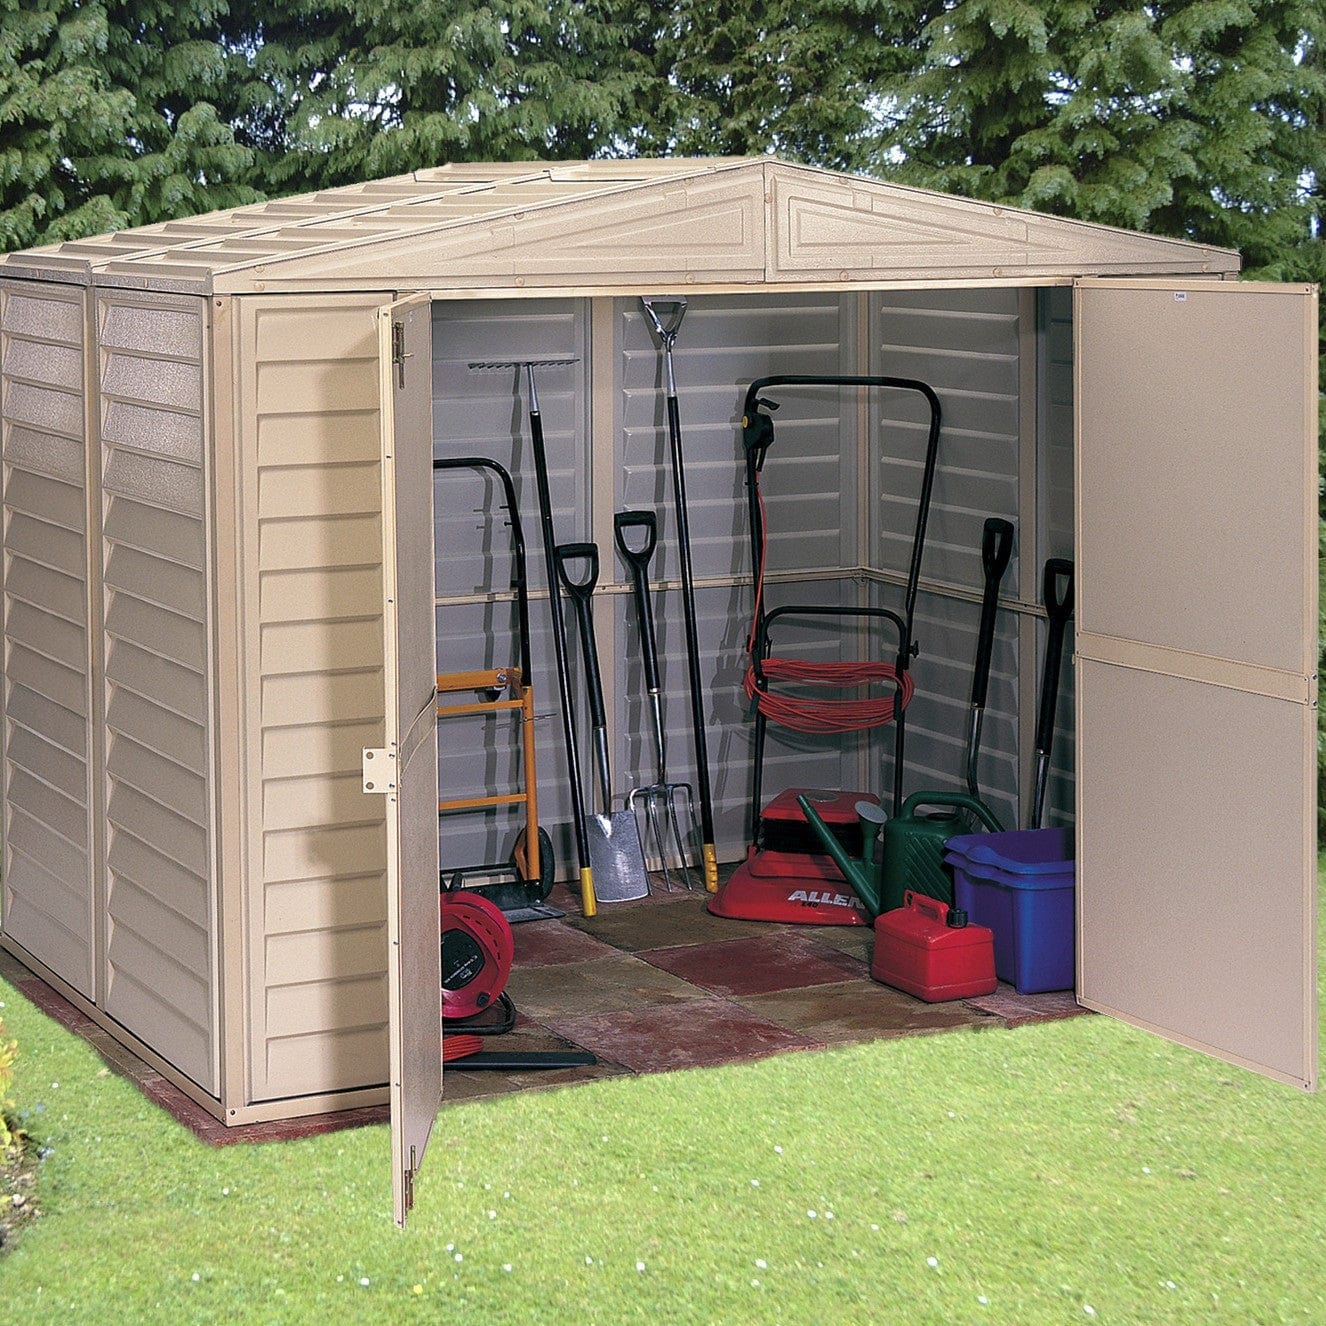 DuraMax Vinyl Shed 8x6 DuraMate with Foundation Kit